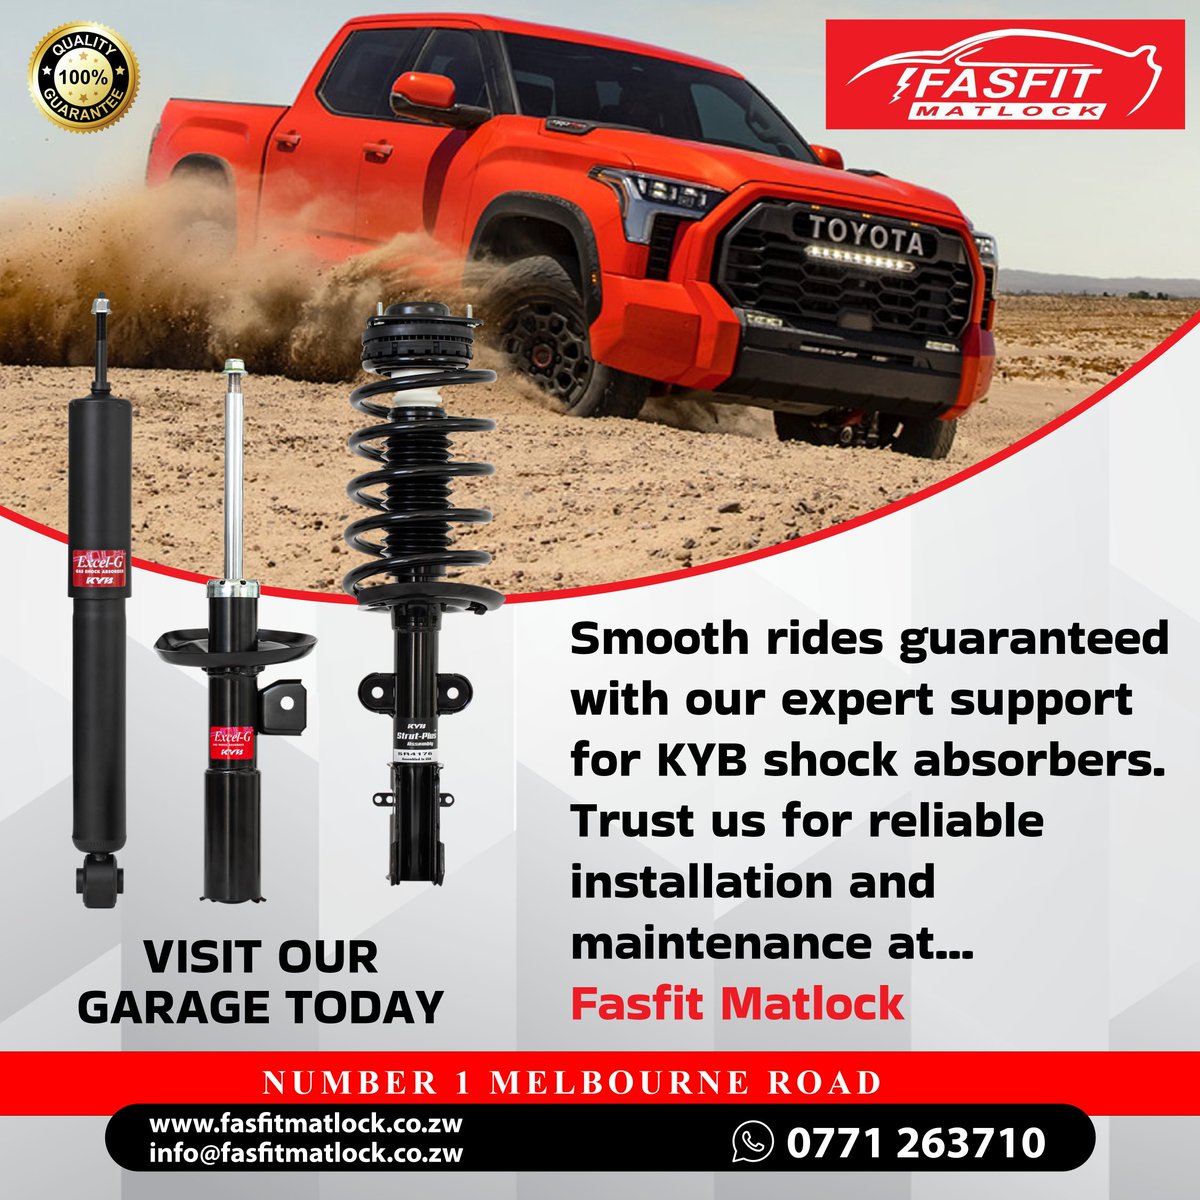 No more Tuesday bumps! Smooth out your ride with our expert shock absorber service at Fasfit Matlock. Say goodbye to pothole woes and hello to a smoother journey ahead. Get back on track with confidence.